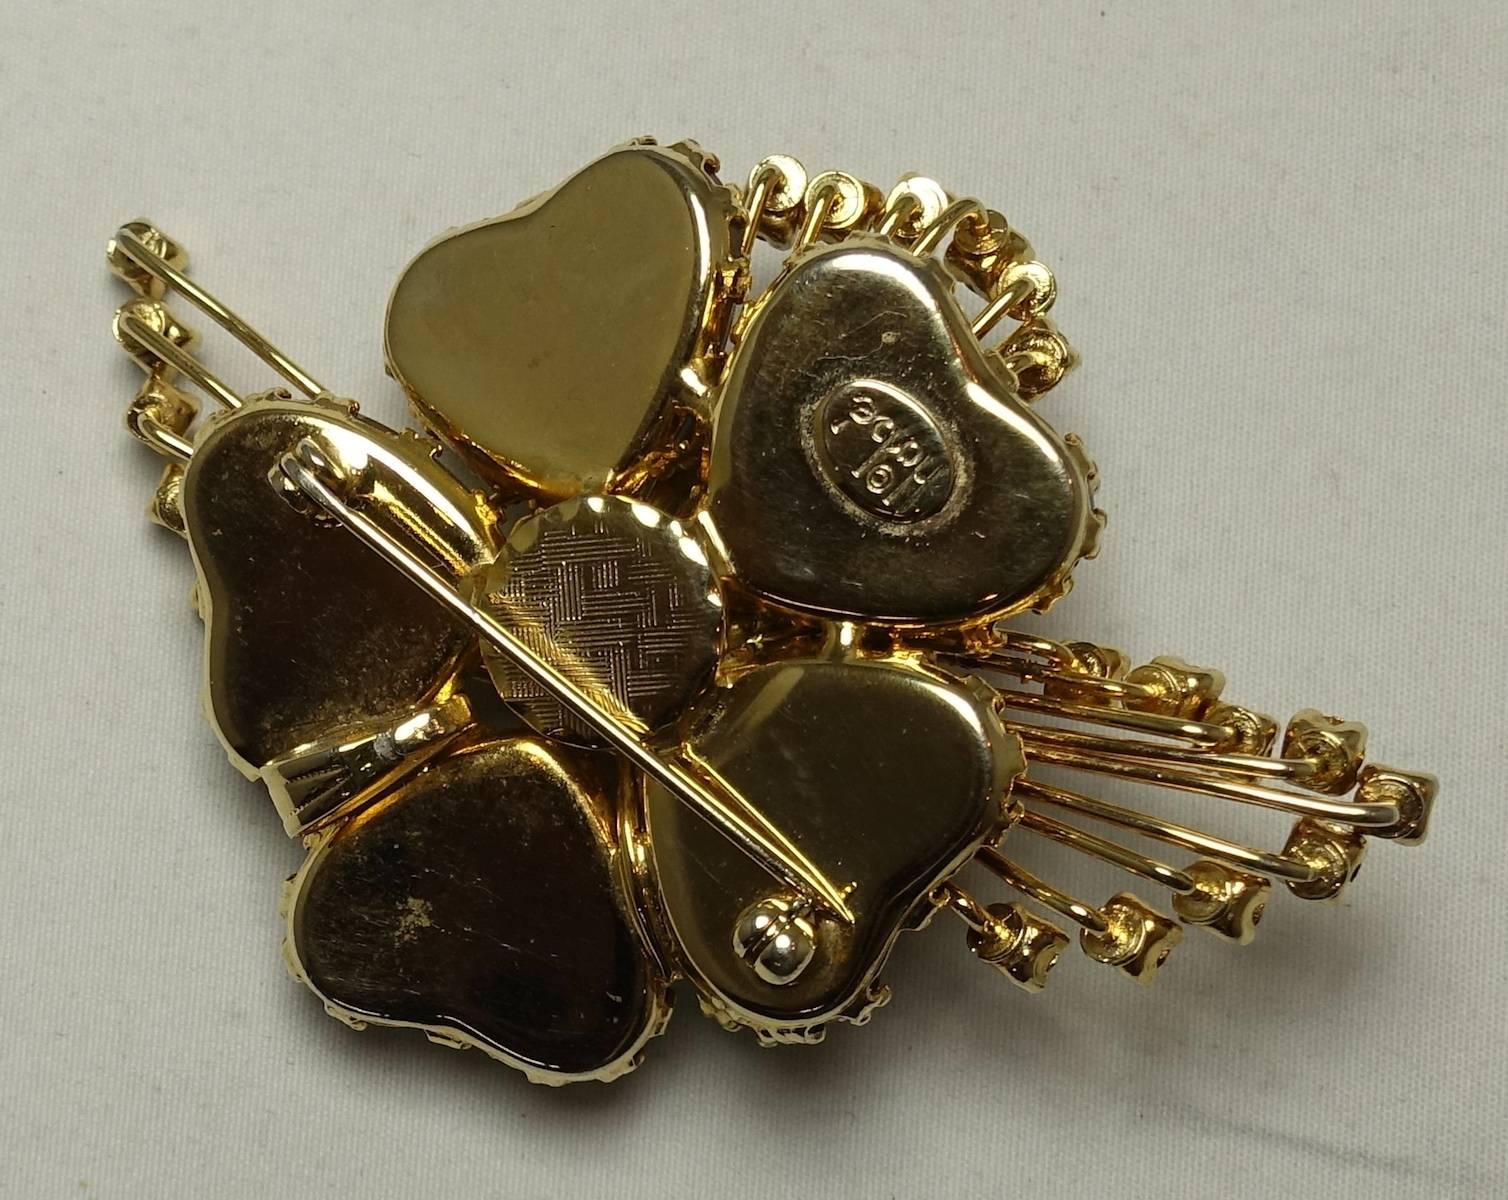 This is lovely1940s vintage seldom seen Hobe brooch. It is designed with five ice blue iridescent hearts accented with rhinestone borders in a gold tone setting. This brooch measures 3” x 2” and signed “Hobe”. It is in excellent condition.